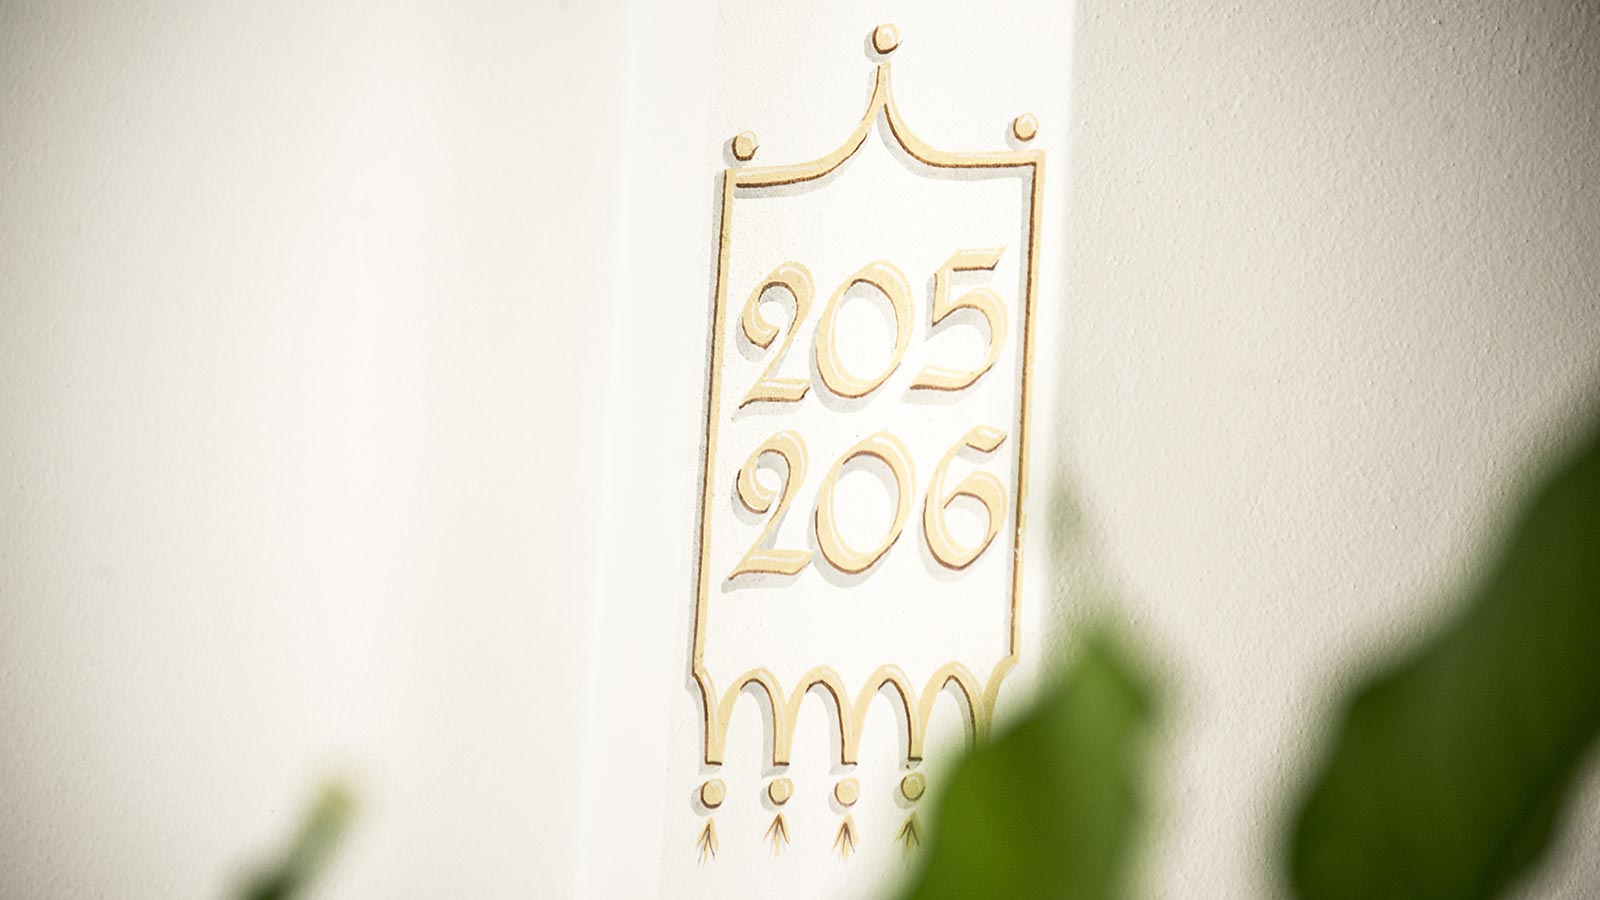 Detail of hotel Gschwendt's room numbers with golden lettering